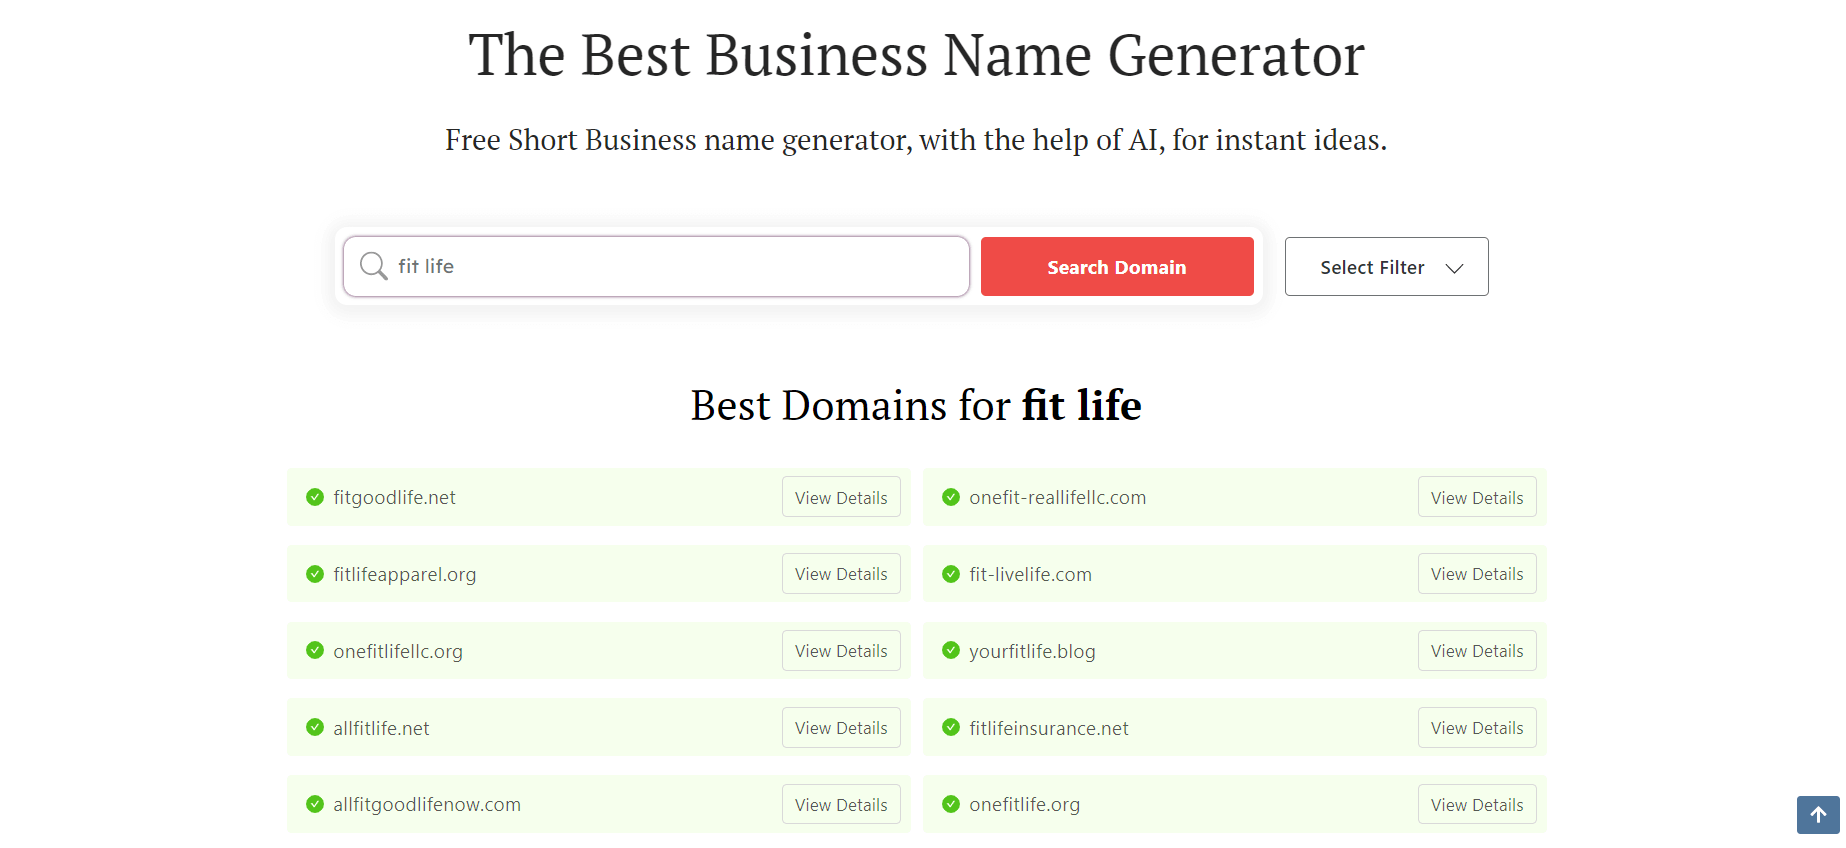 Fitness brand name ideas generated by the DomainWheel business name generator